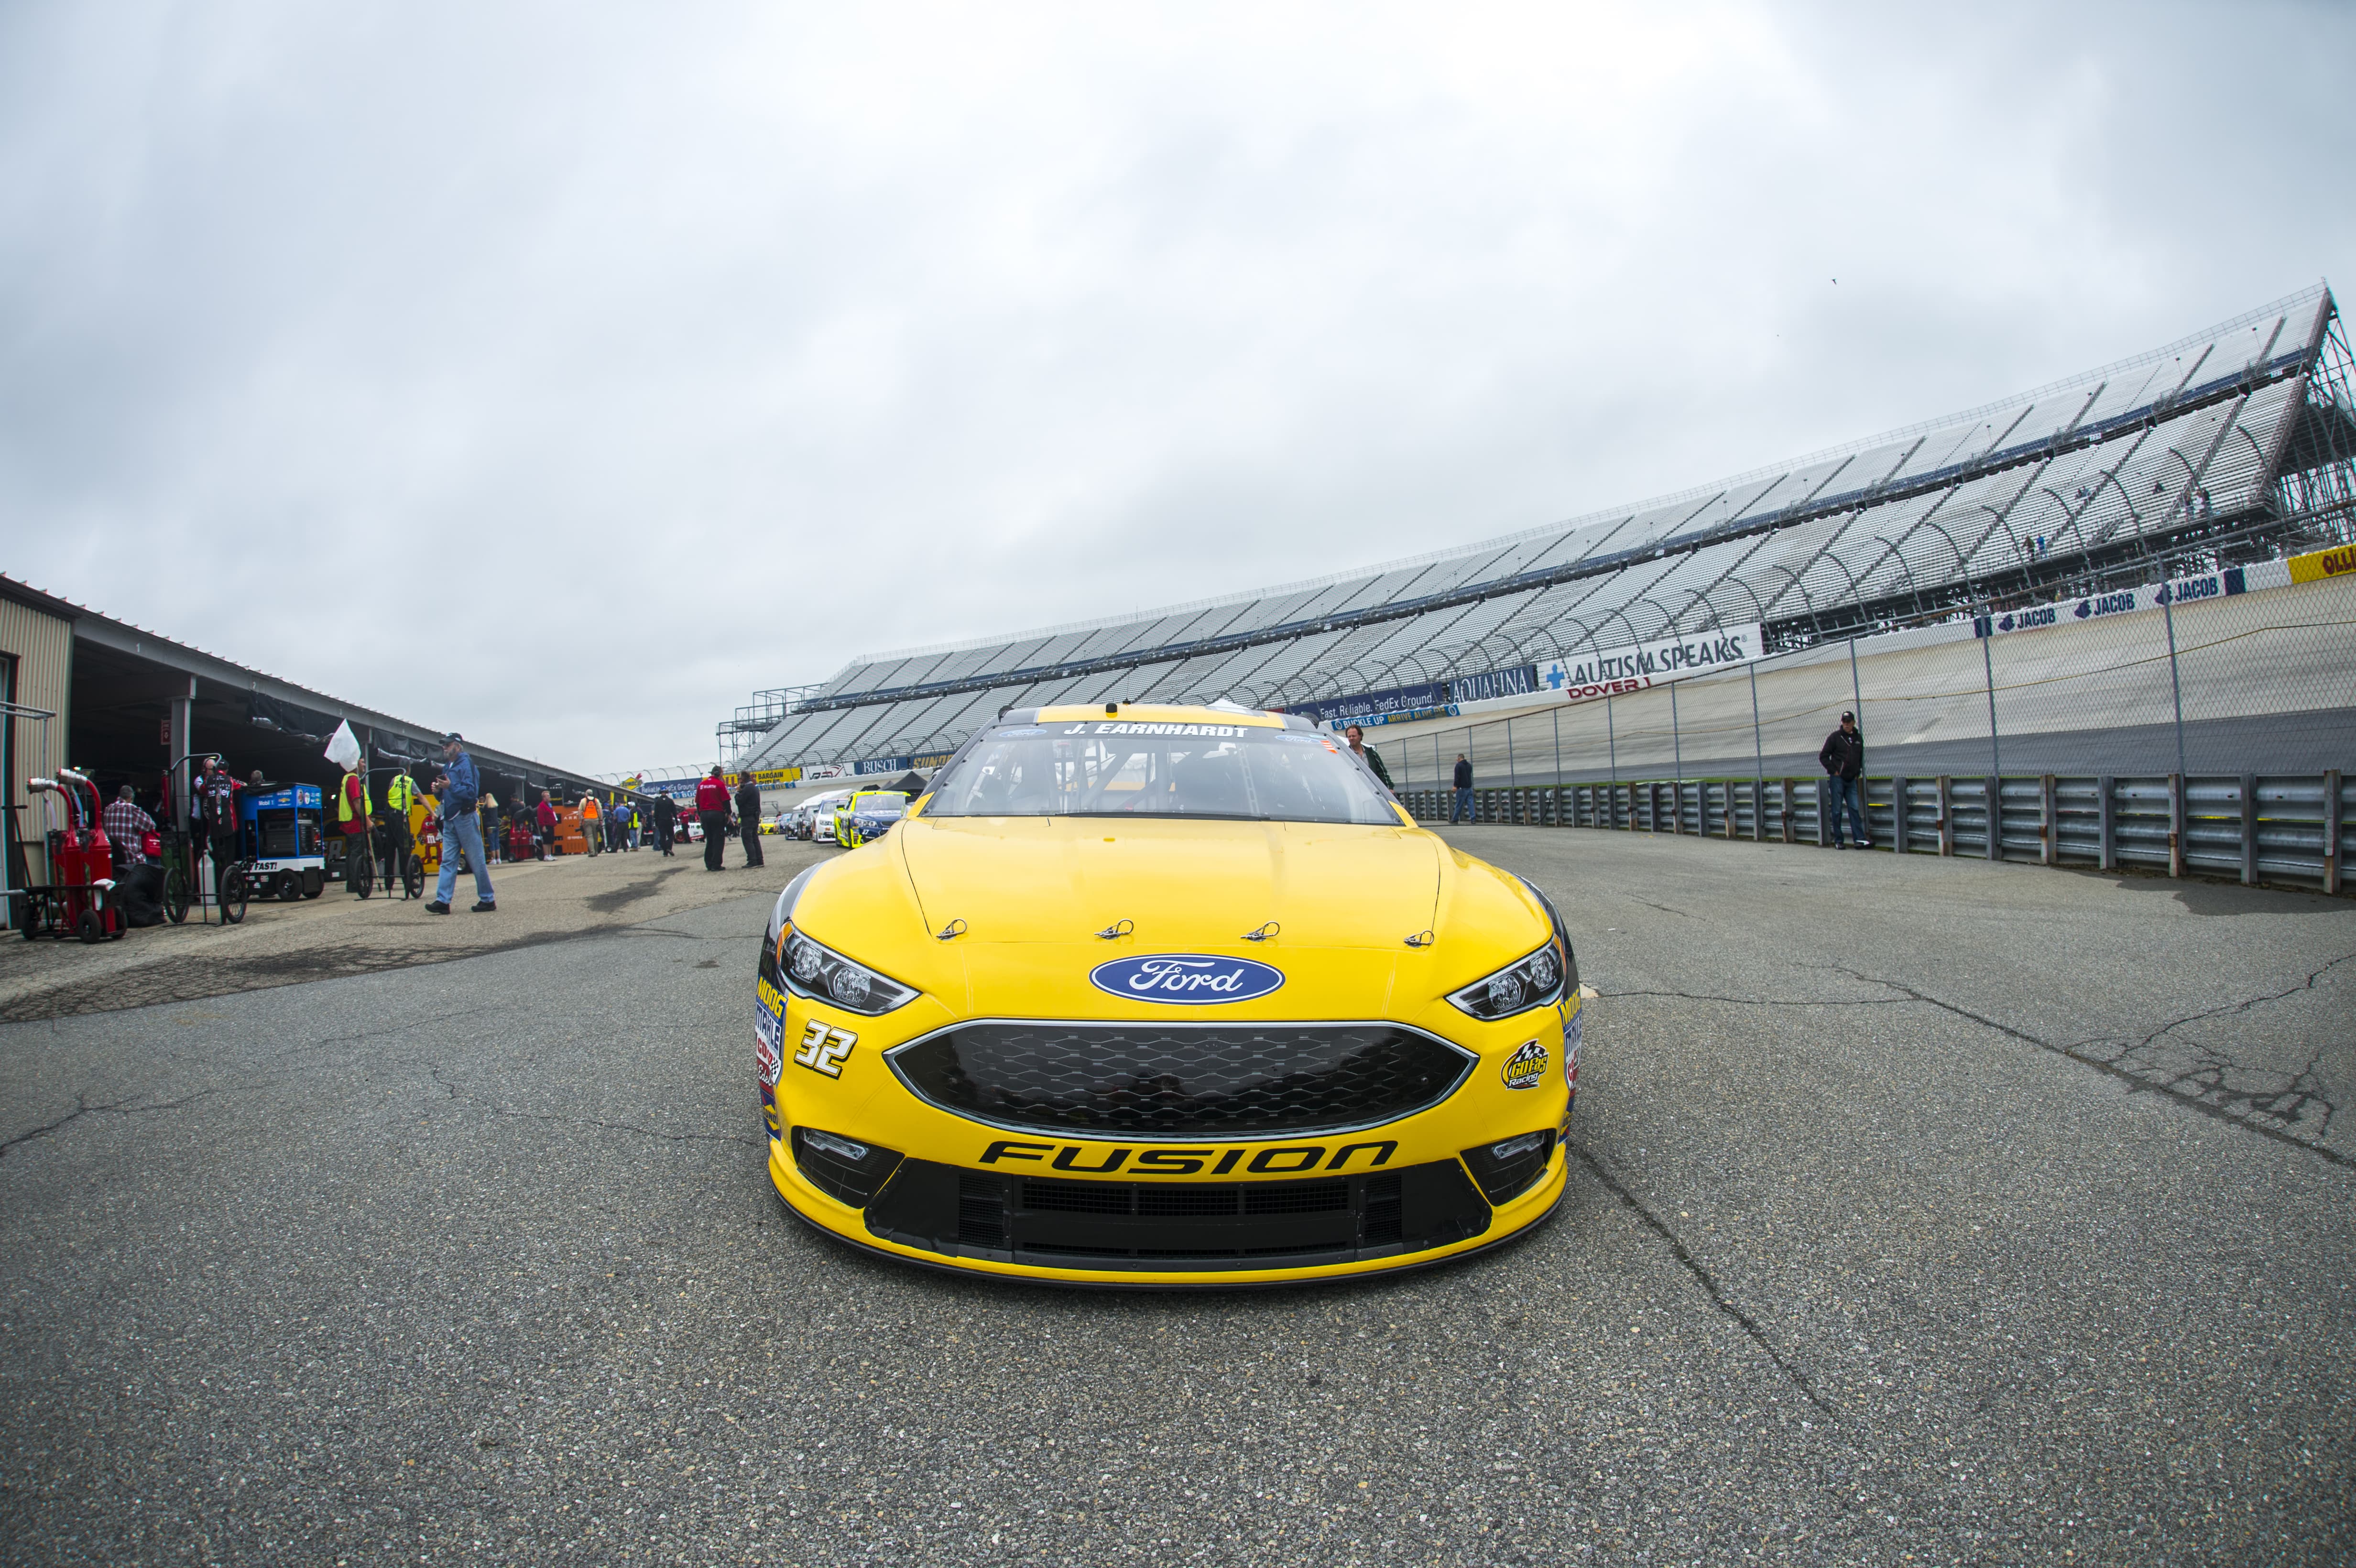 NASCAR: May 13 AAA 400 Drive For Autism